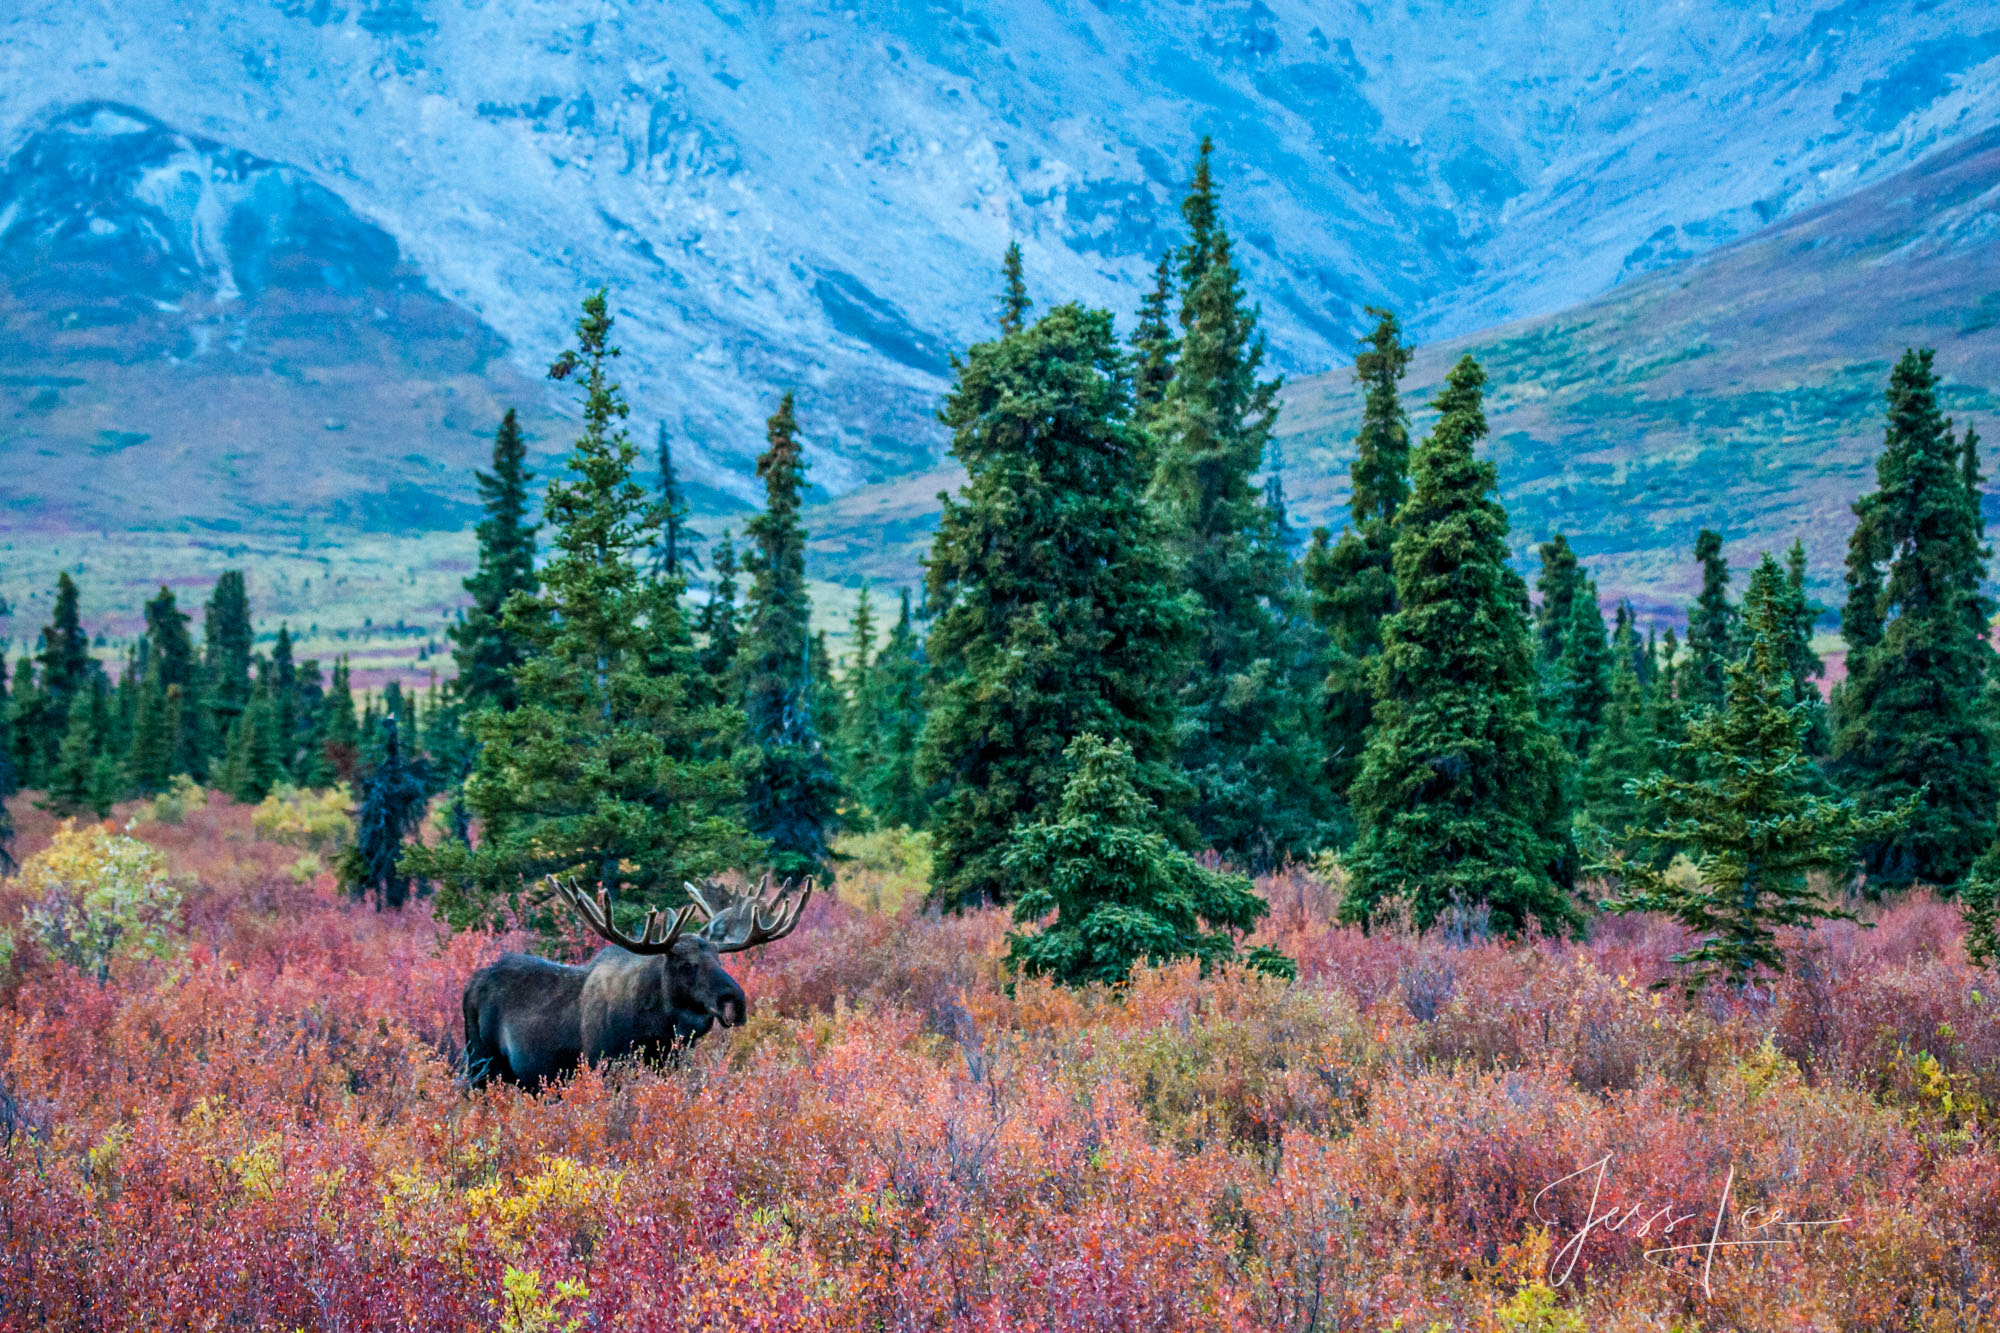 Denali Alaska, bull Moose in the tundra, just down from the mountain tops during the Fall breeding season. A limited edition...